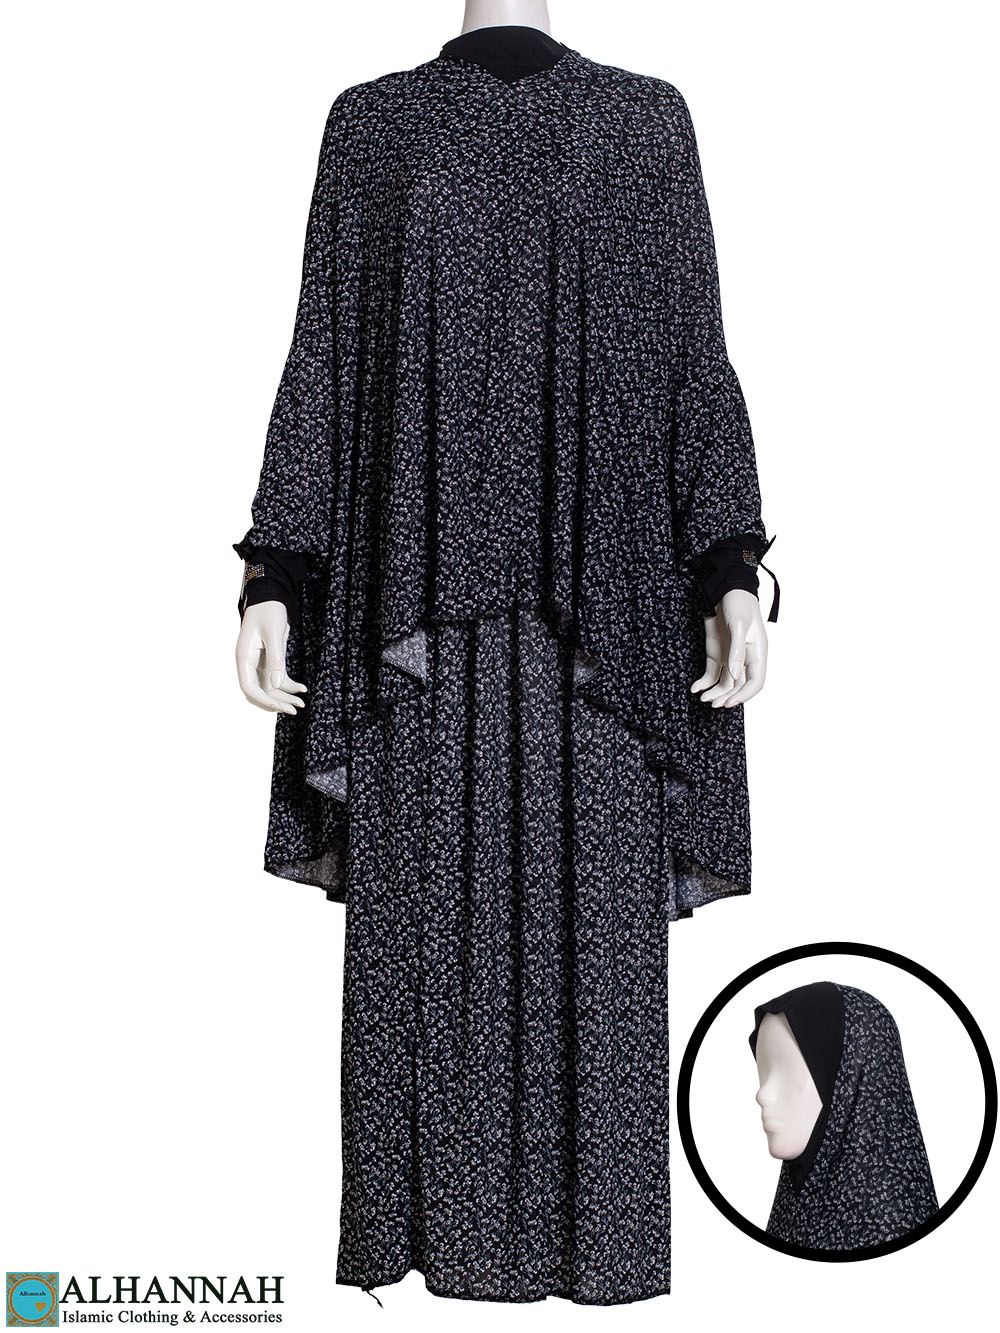 2 Piece Prayer Outfit - Charcoal Print - ps637